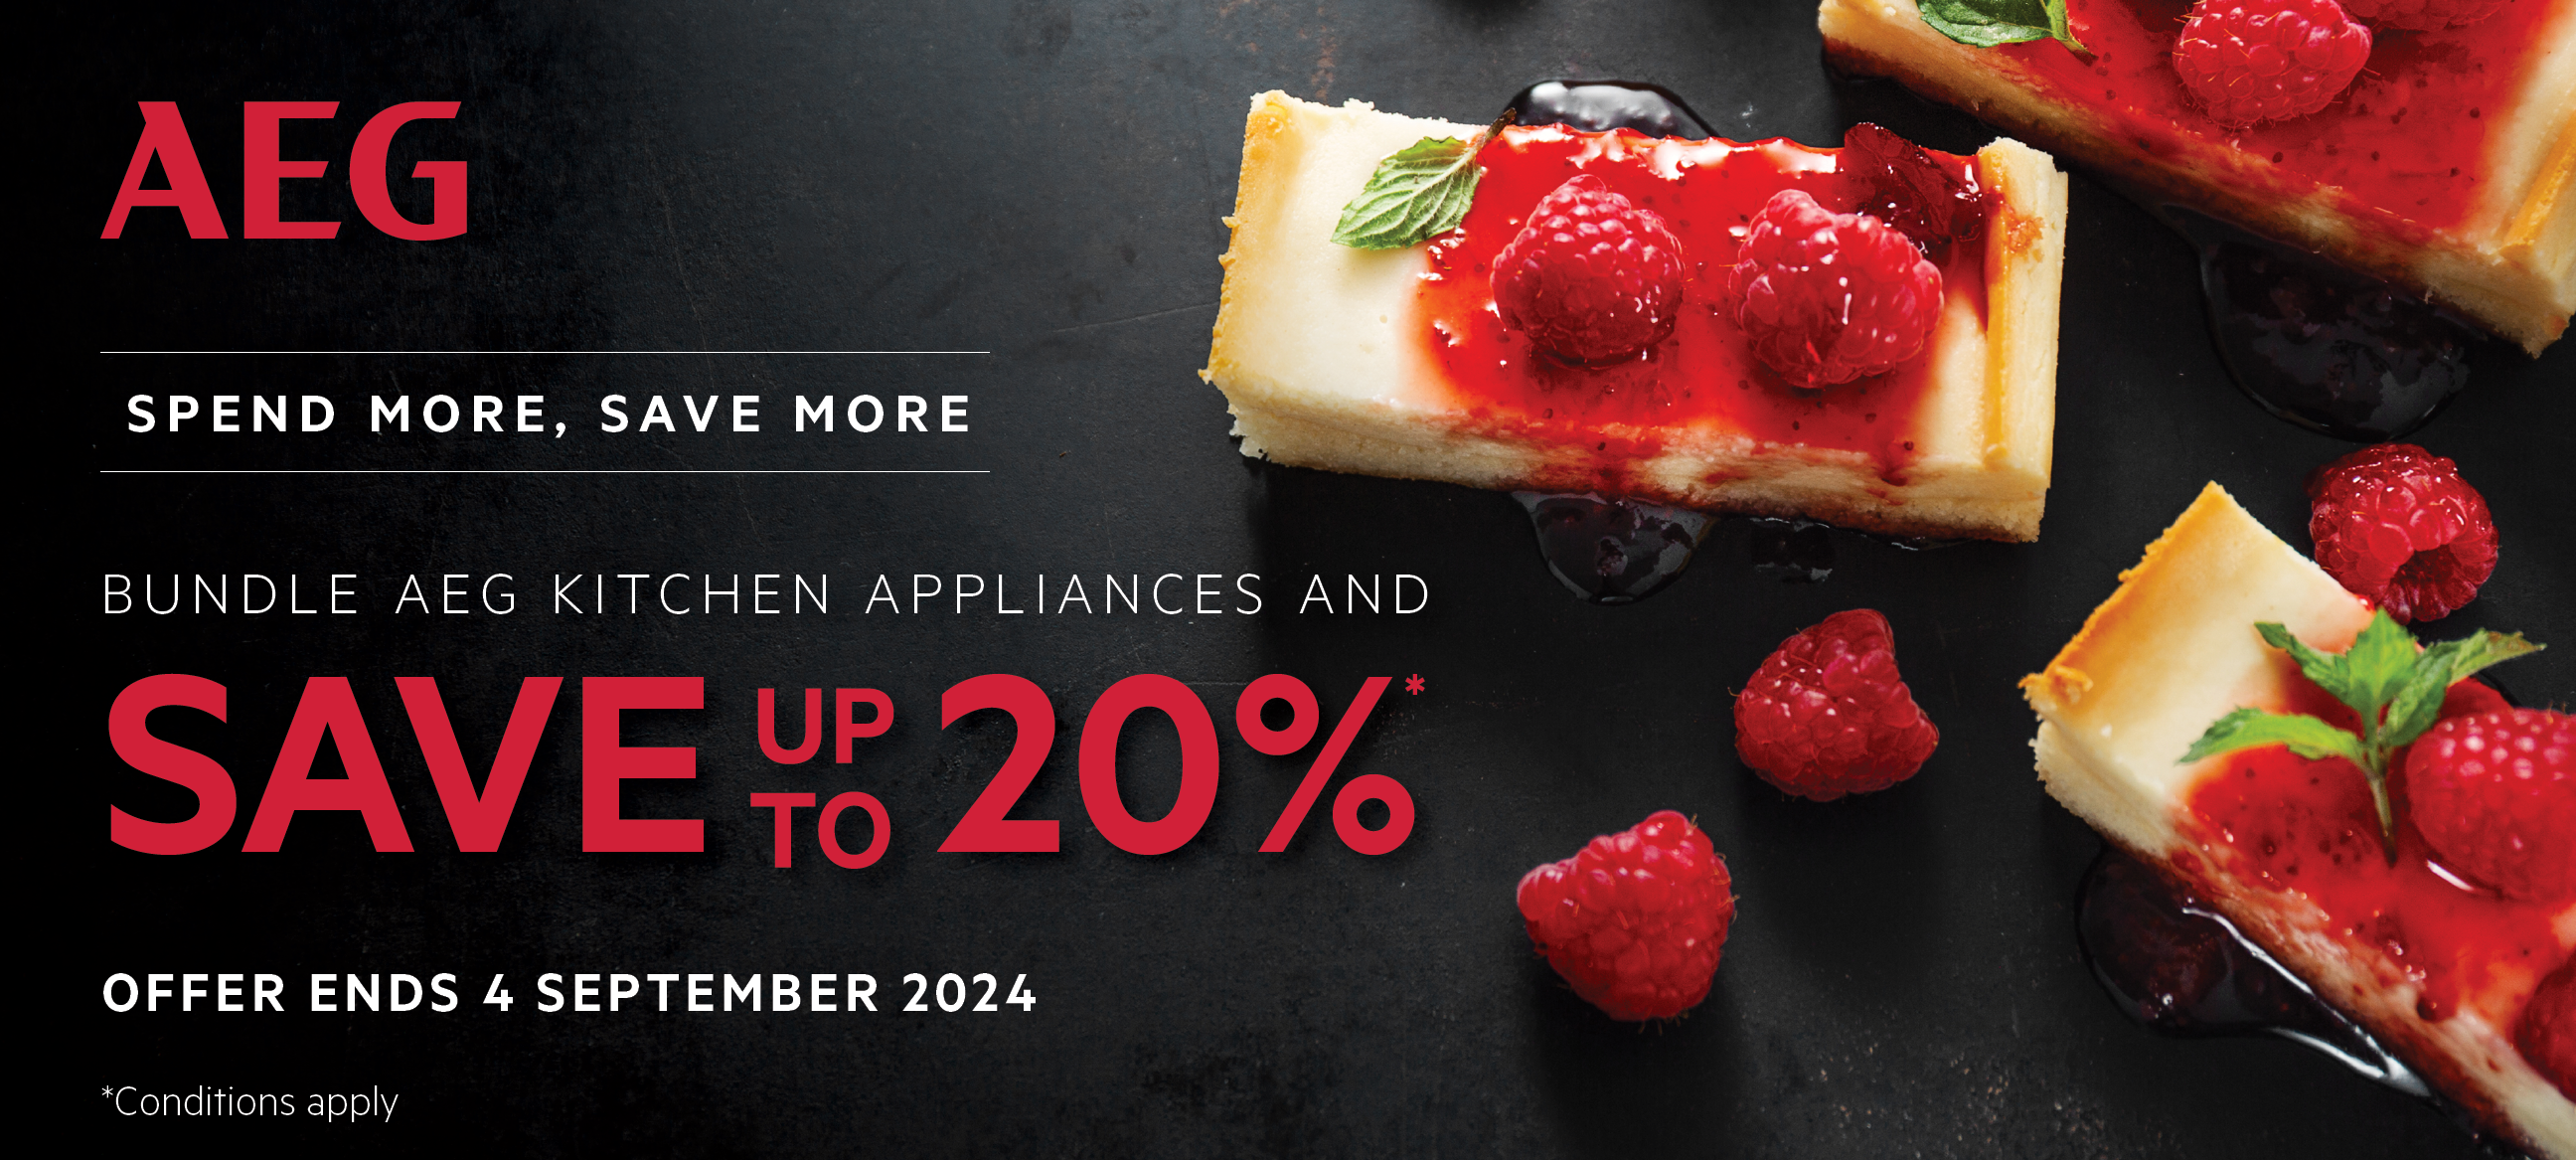 Bundle AEG Kitchen Appliances And Save Up To 20%*